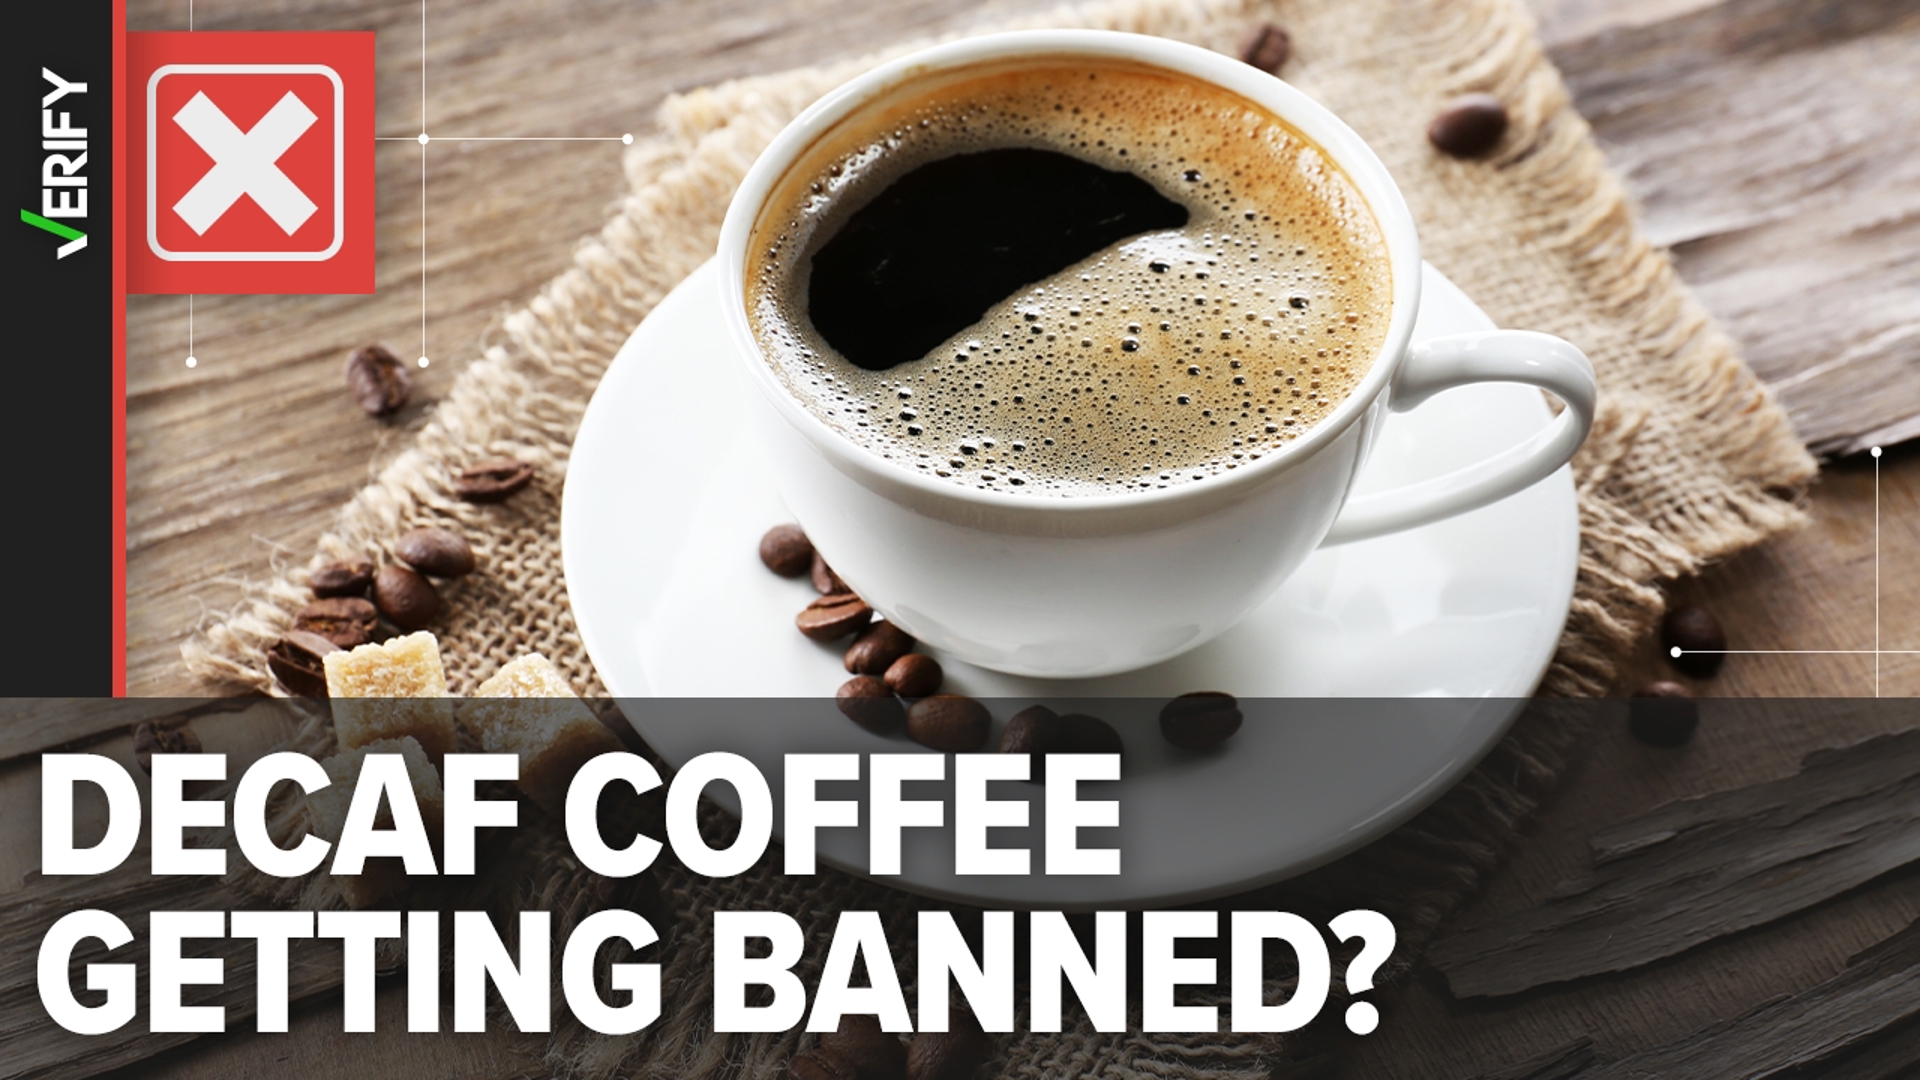 Some headlines claim the Environmental Protection Agency and Food and Drug Administration are banning decaffeinated coffee in the U.S. That’s false.